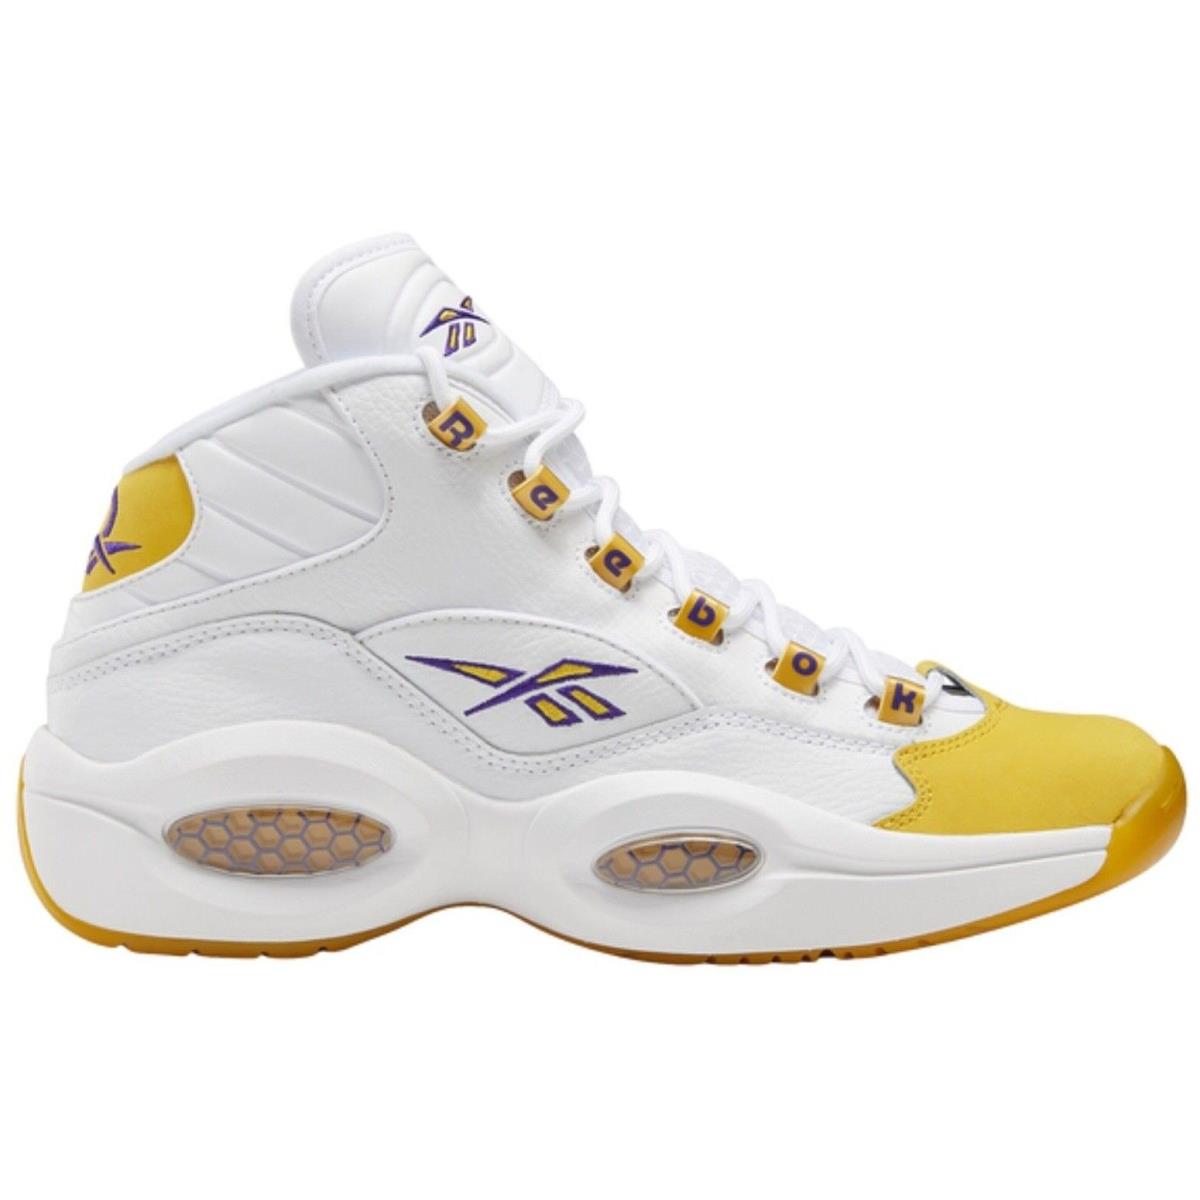 Reebok Question Mid Men`s Basketball Shoes All Colors US Sizes 7-14 White / Yellow Light Heather / Ultraviolet